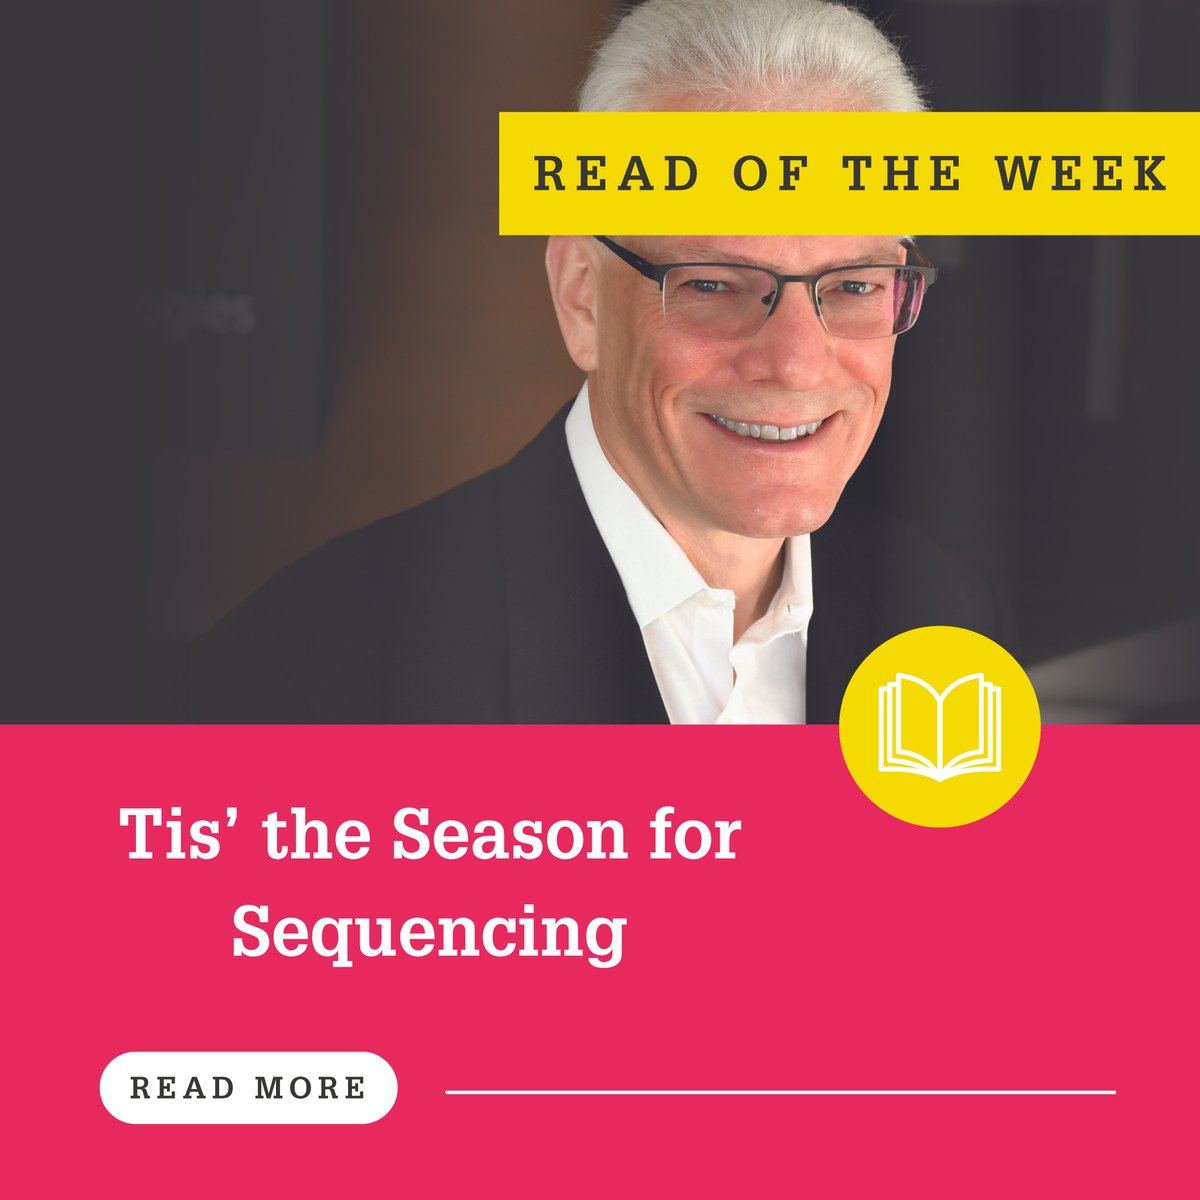 In this week’s #ReadoftheWeek, Steven Henck explores the value of next-generation sequencing for combatting respiratory viruses – and how its adoption is only going to grow.

Check it out below!

bit.ly/3QTSPJh